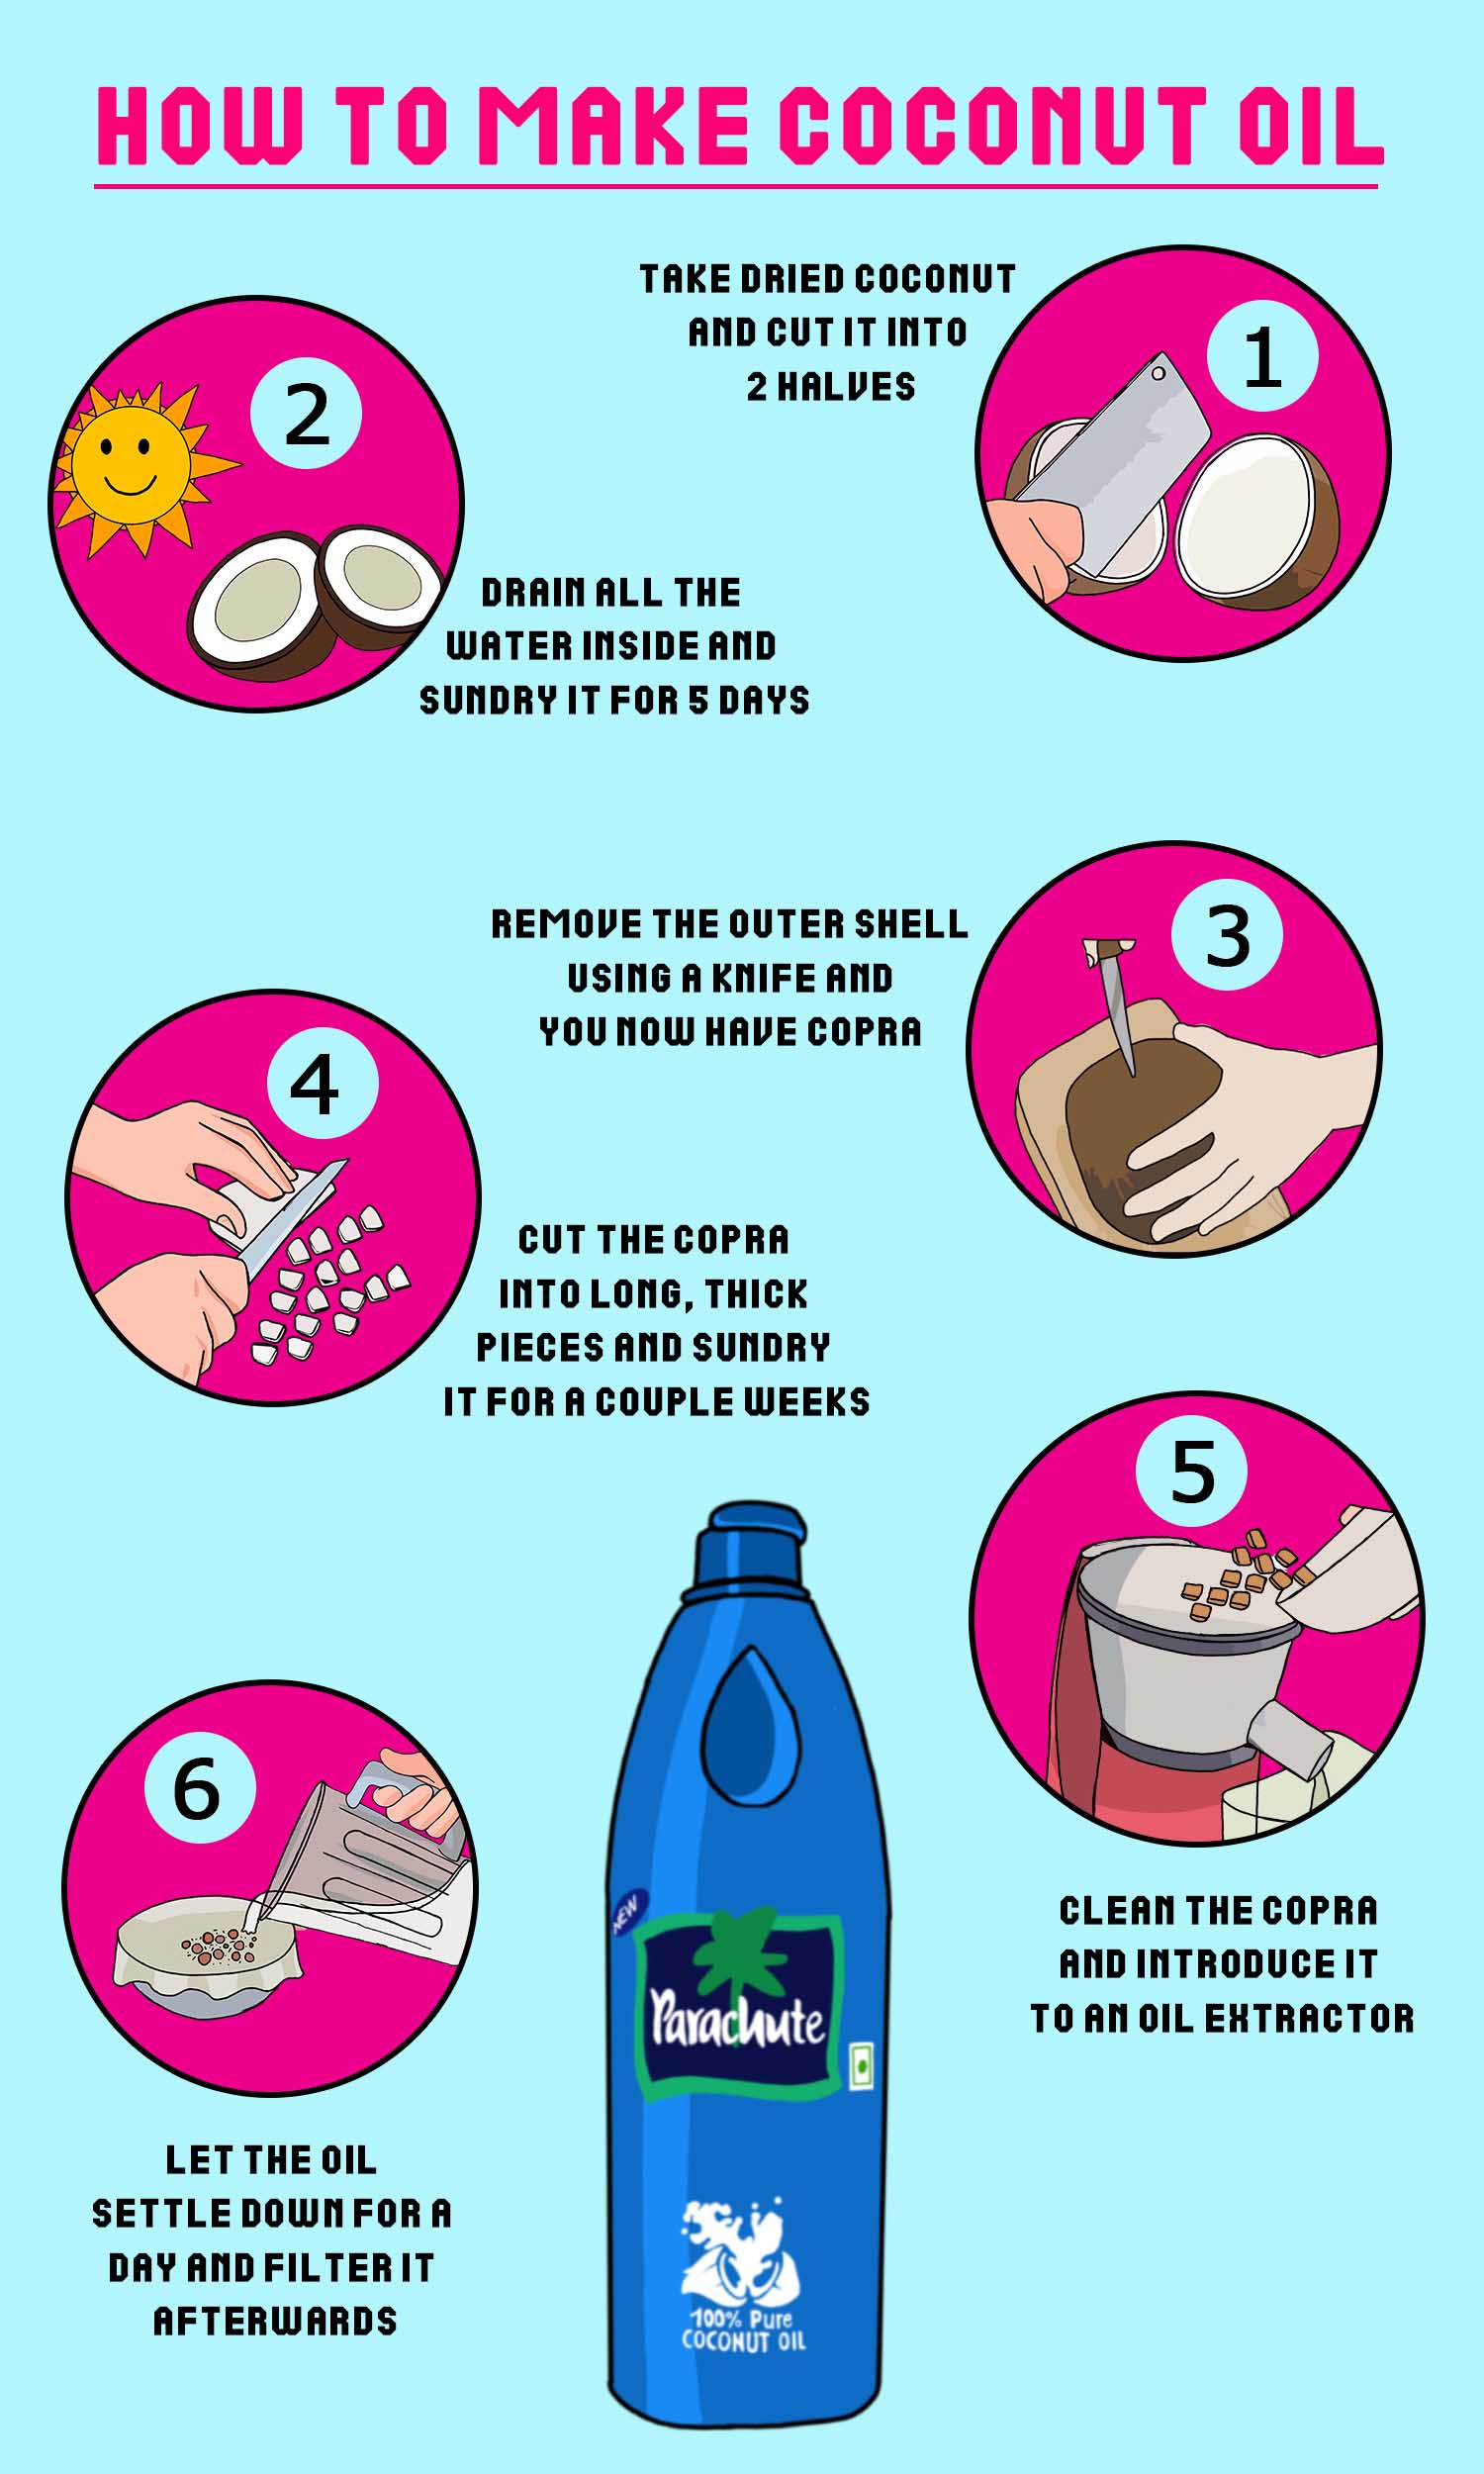 How to make coconut oil?